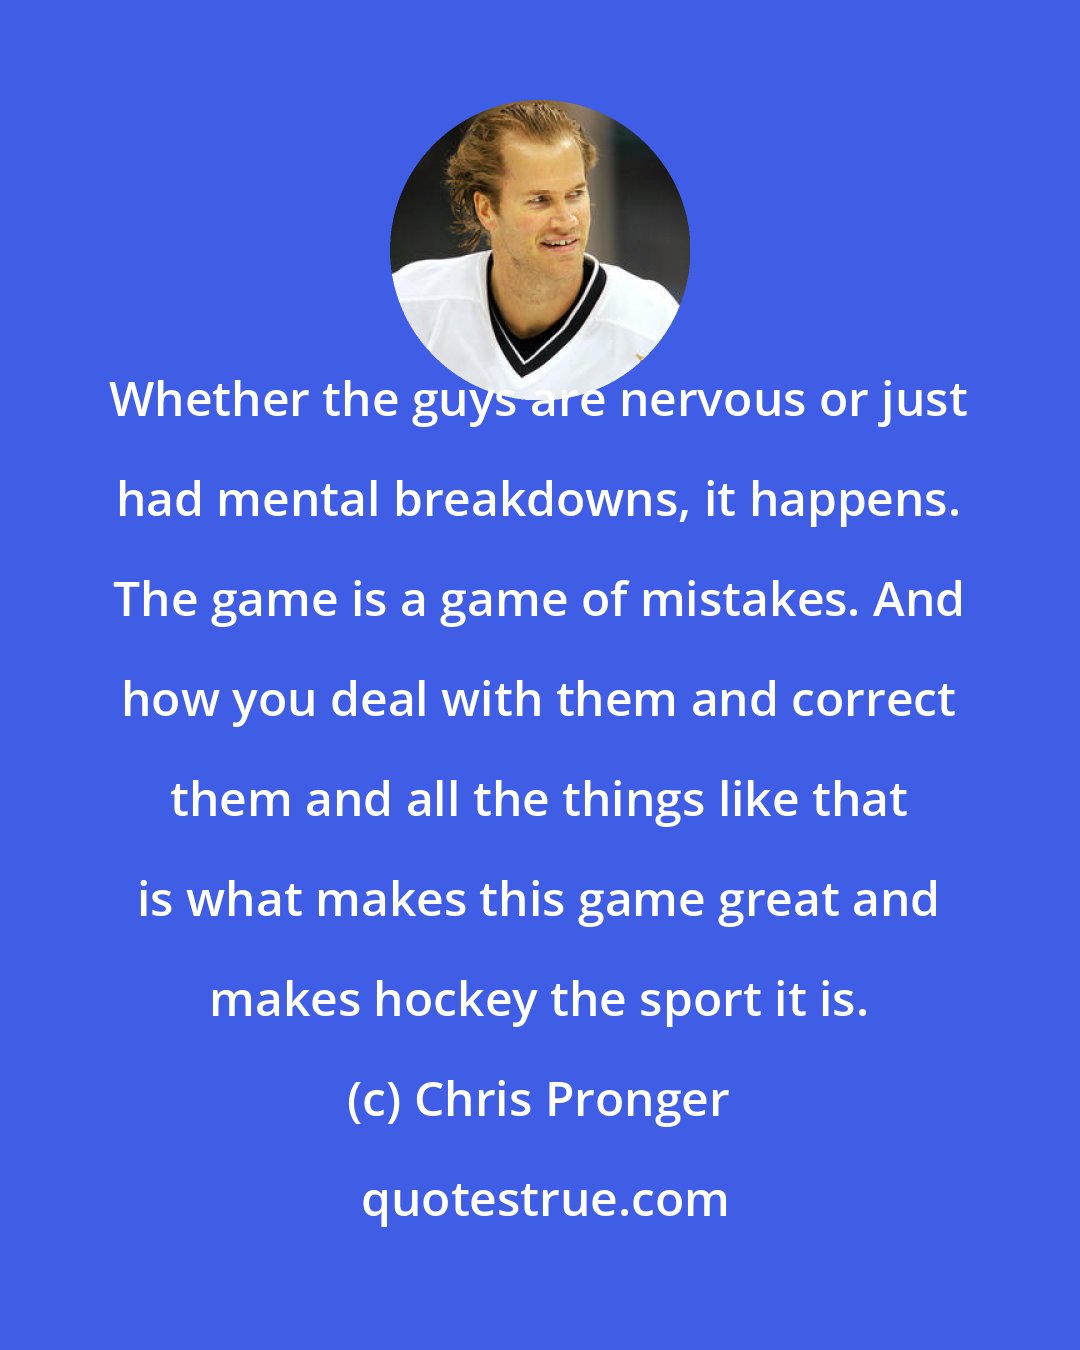 Chris Pronger: Whether the guys are nervous or just had mental breakdowns, it happens. The game is a game of mistakes. And how you deal with them and correct them and all the things like that is what makes this game great and makes hockey the sport it is.